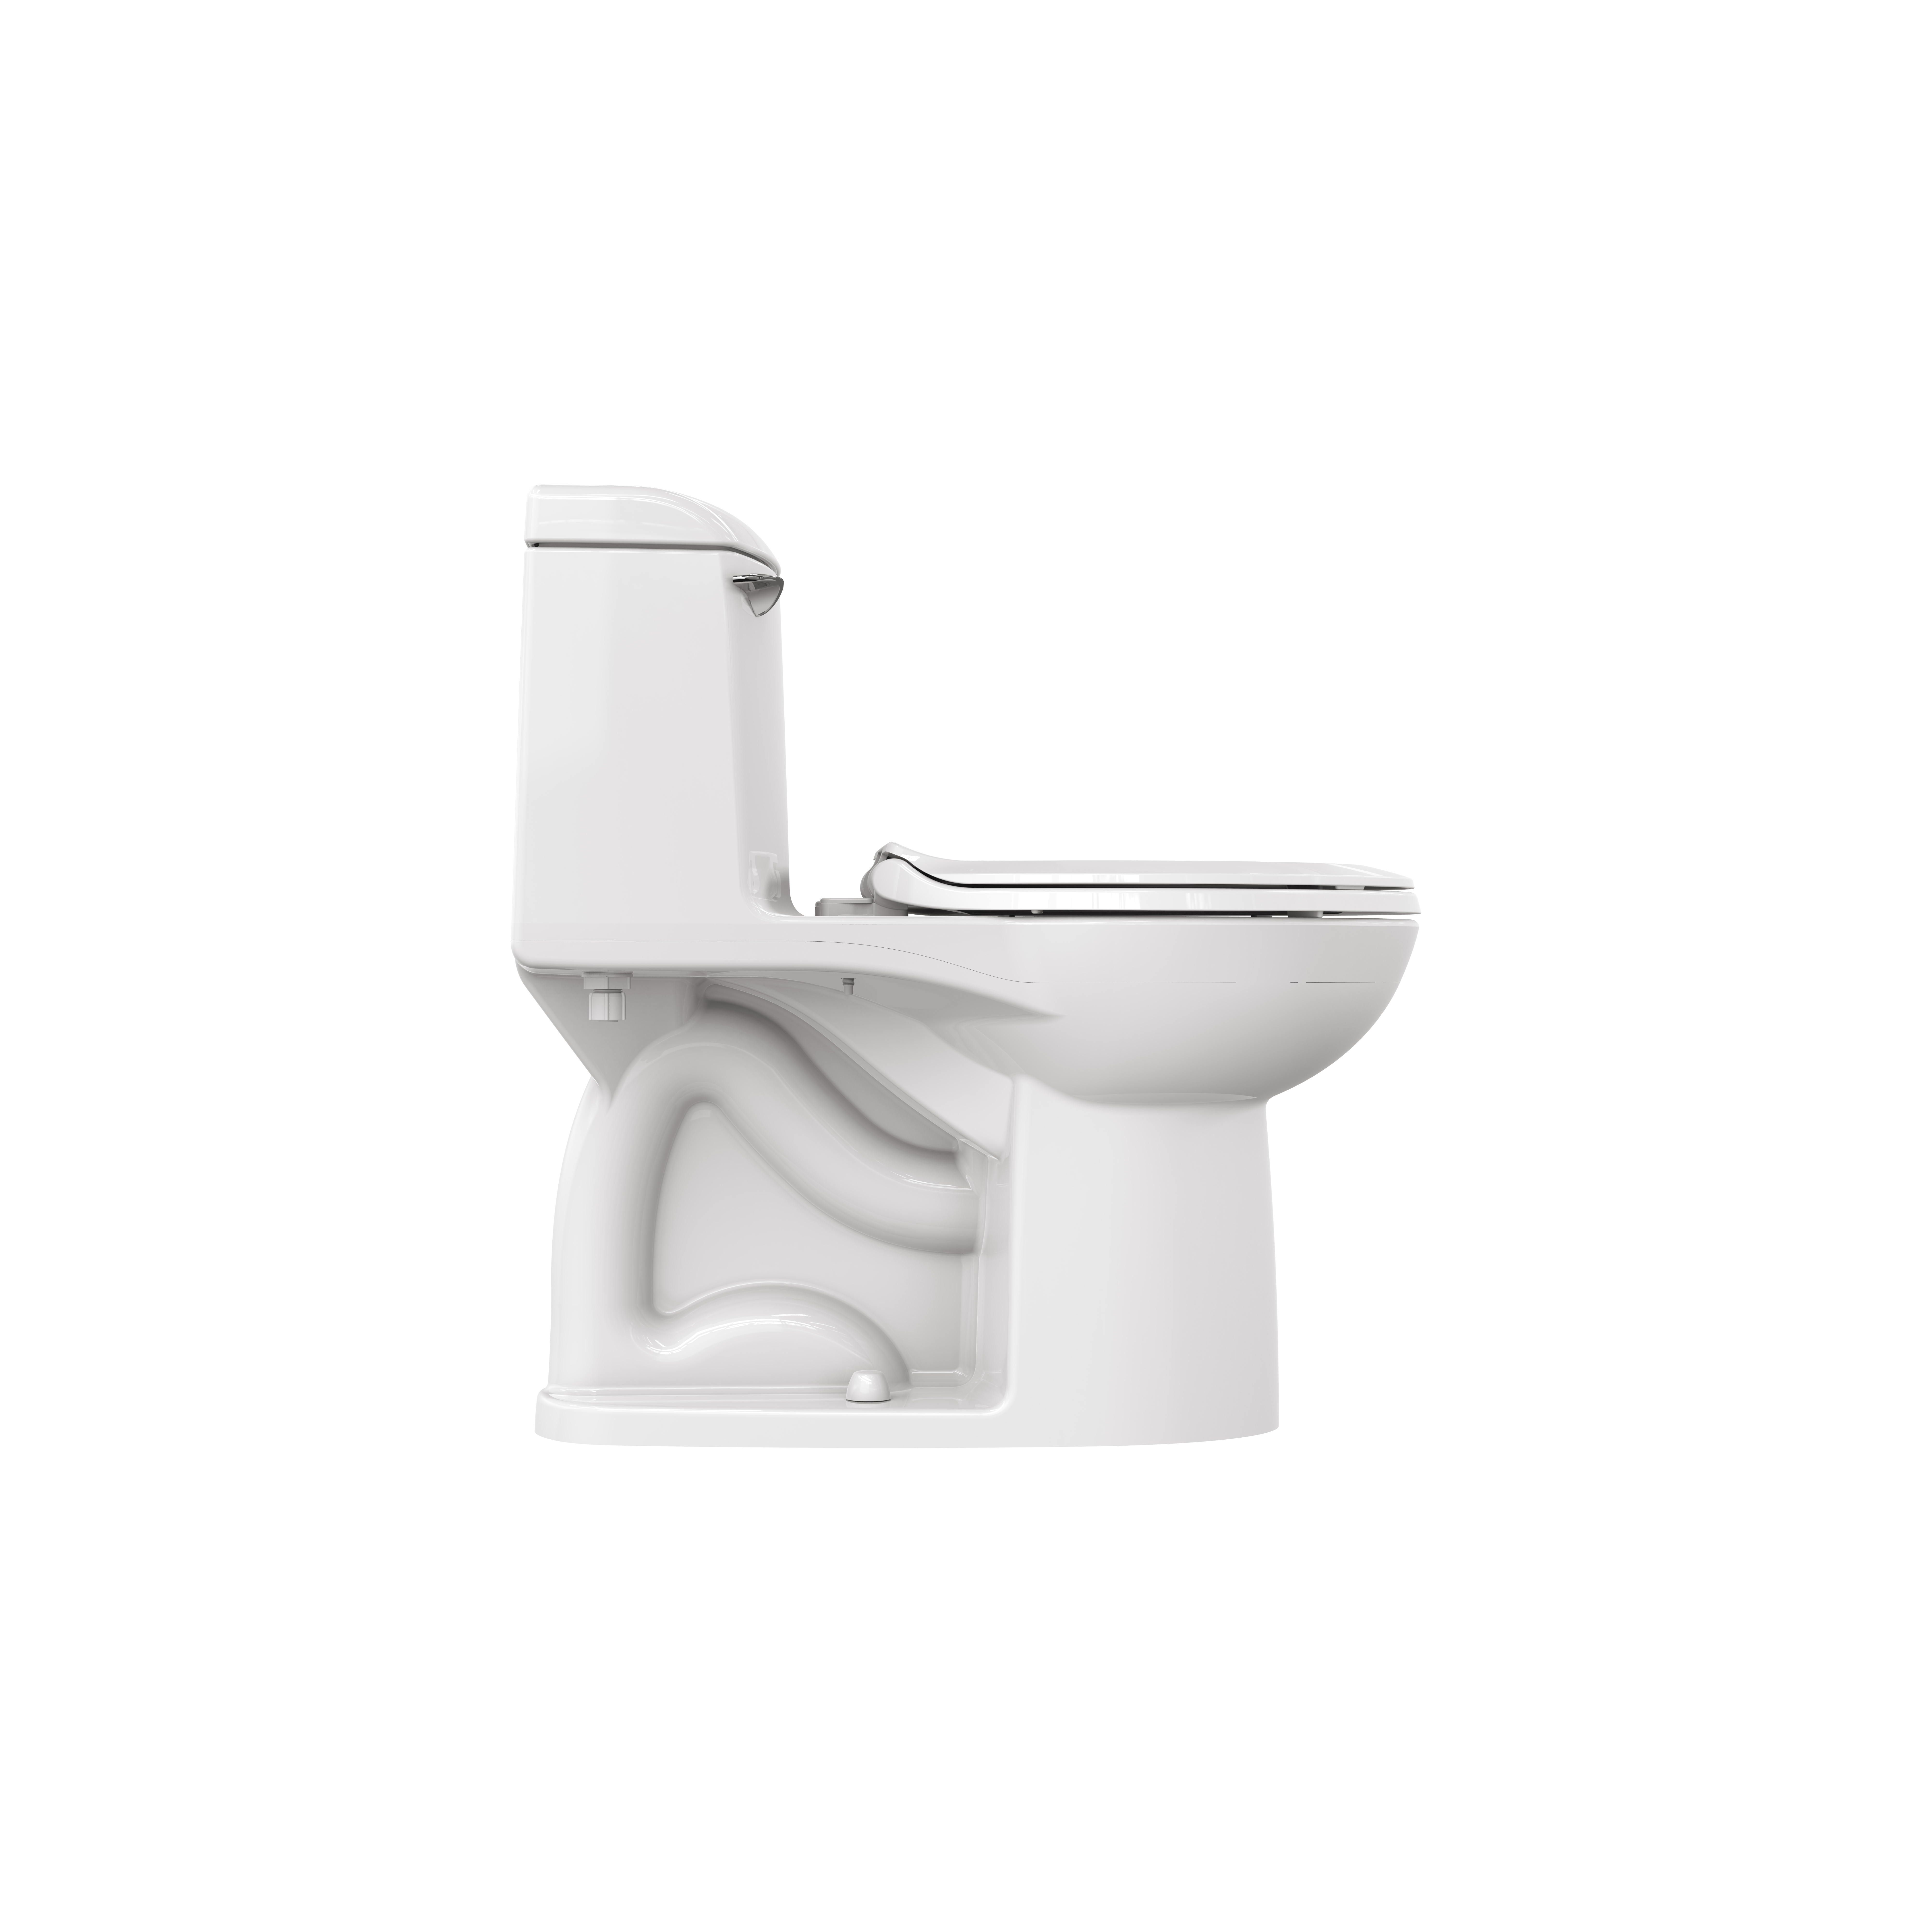 Champion™ 4 One-Piece 1.6 gpf/6.0 Lpf Standard Height Elongated Toilet With Seat